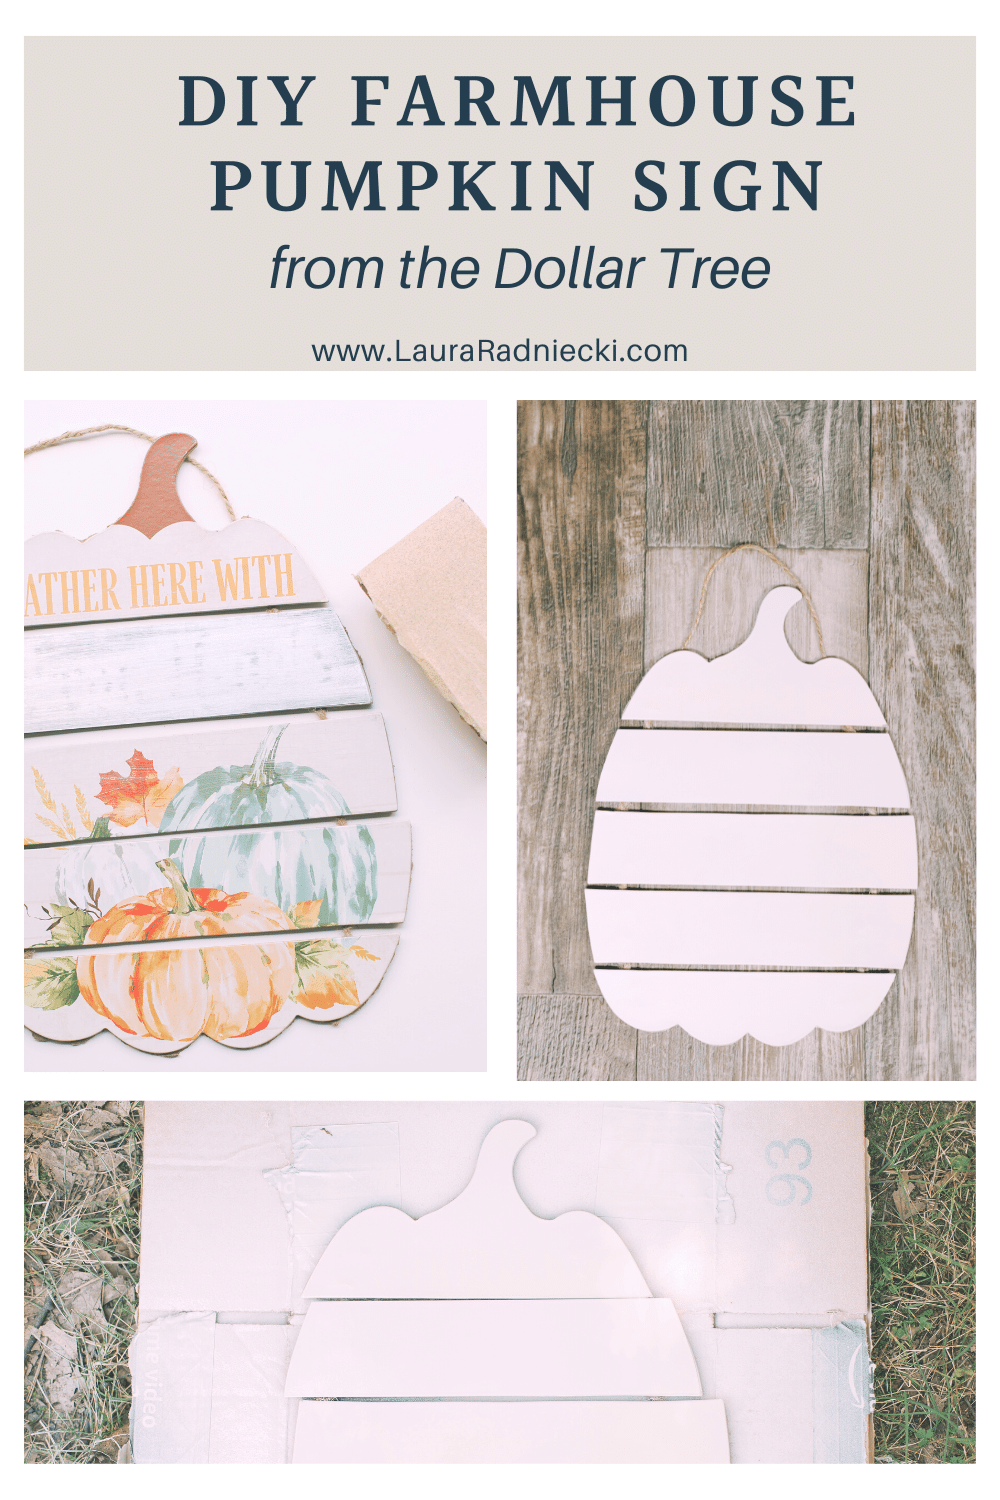 how to make diy farmhouse pumpkin sign from the dollar tree